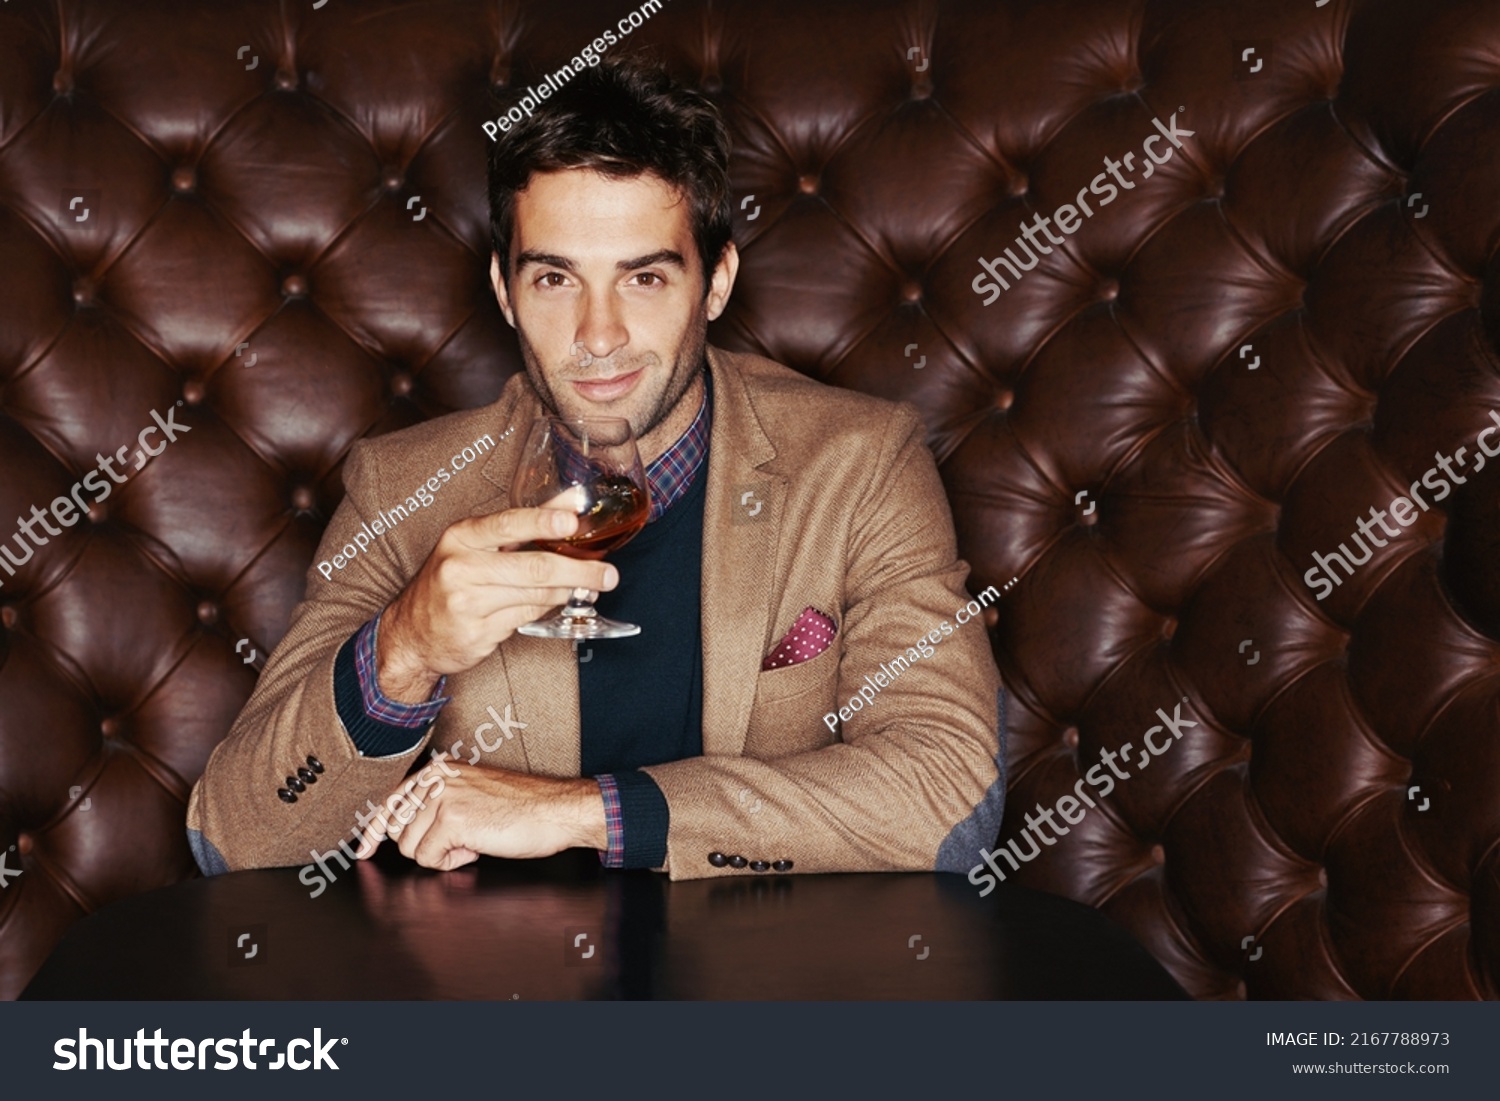 Waiting for my friends. Portrait of a handsome young man drinking in a club. #2167788973